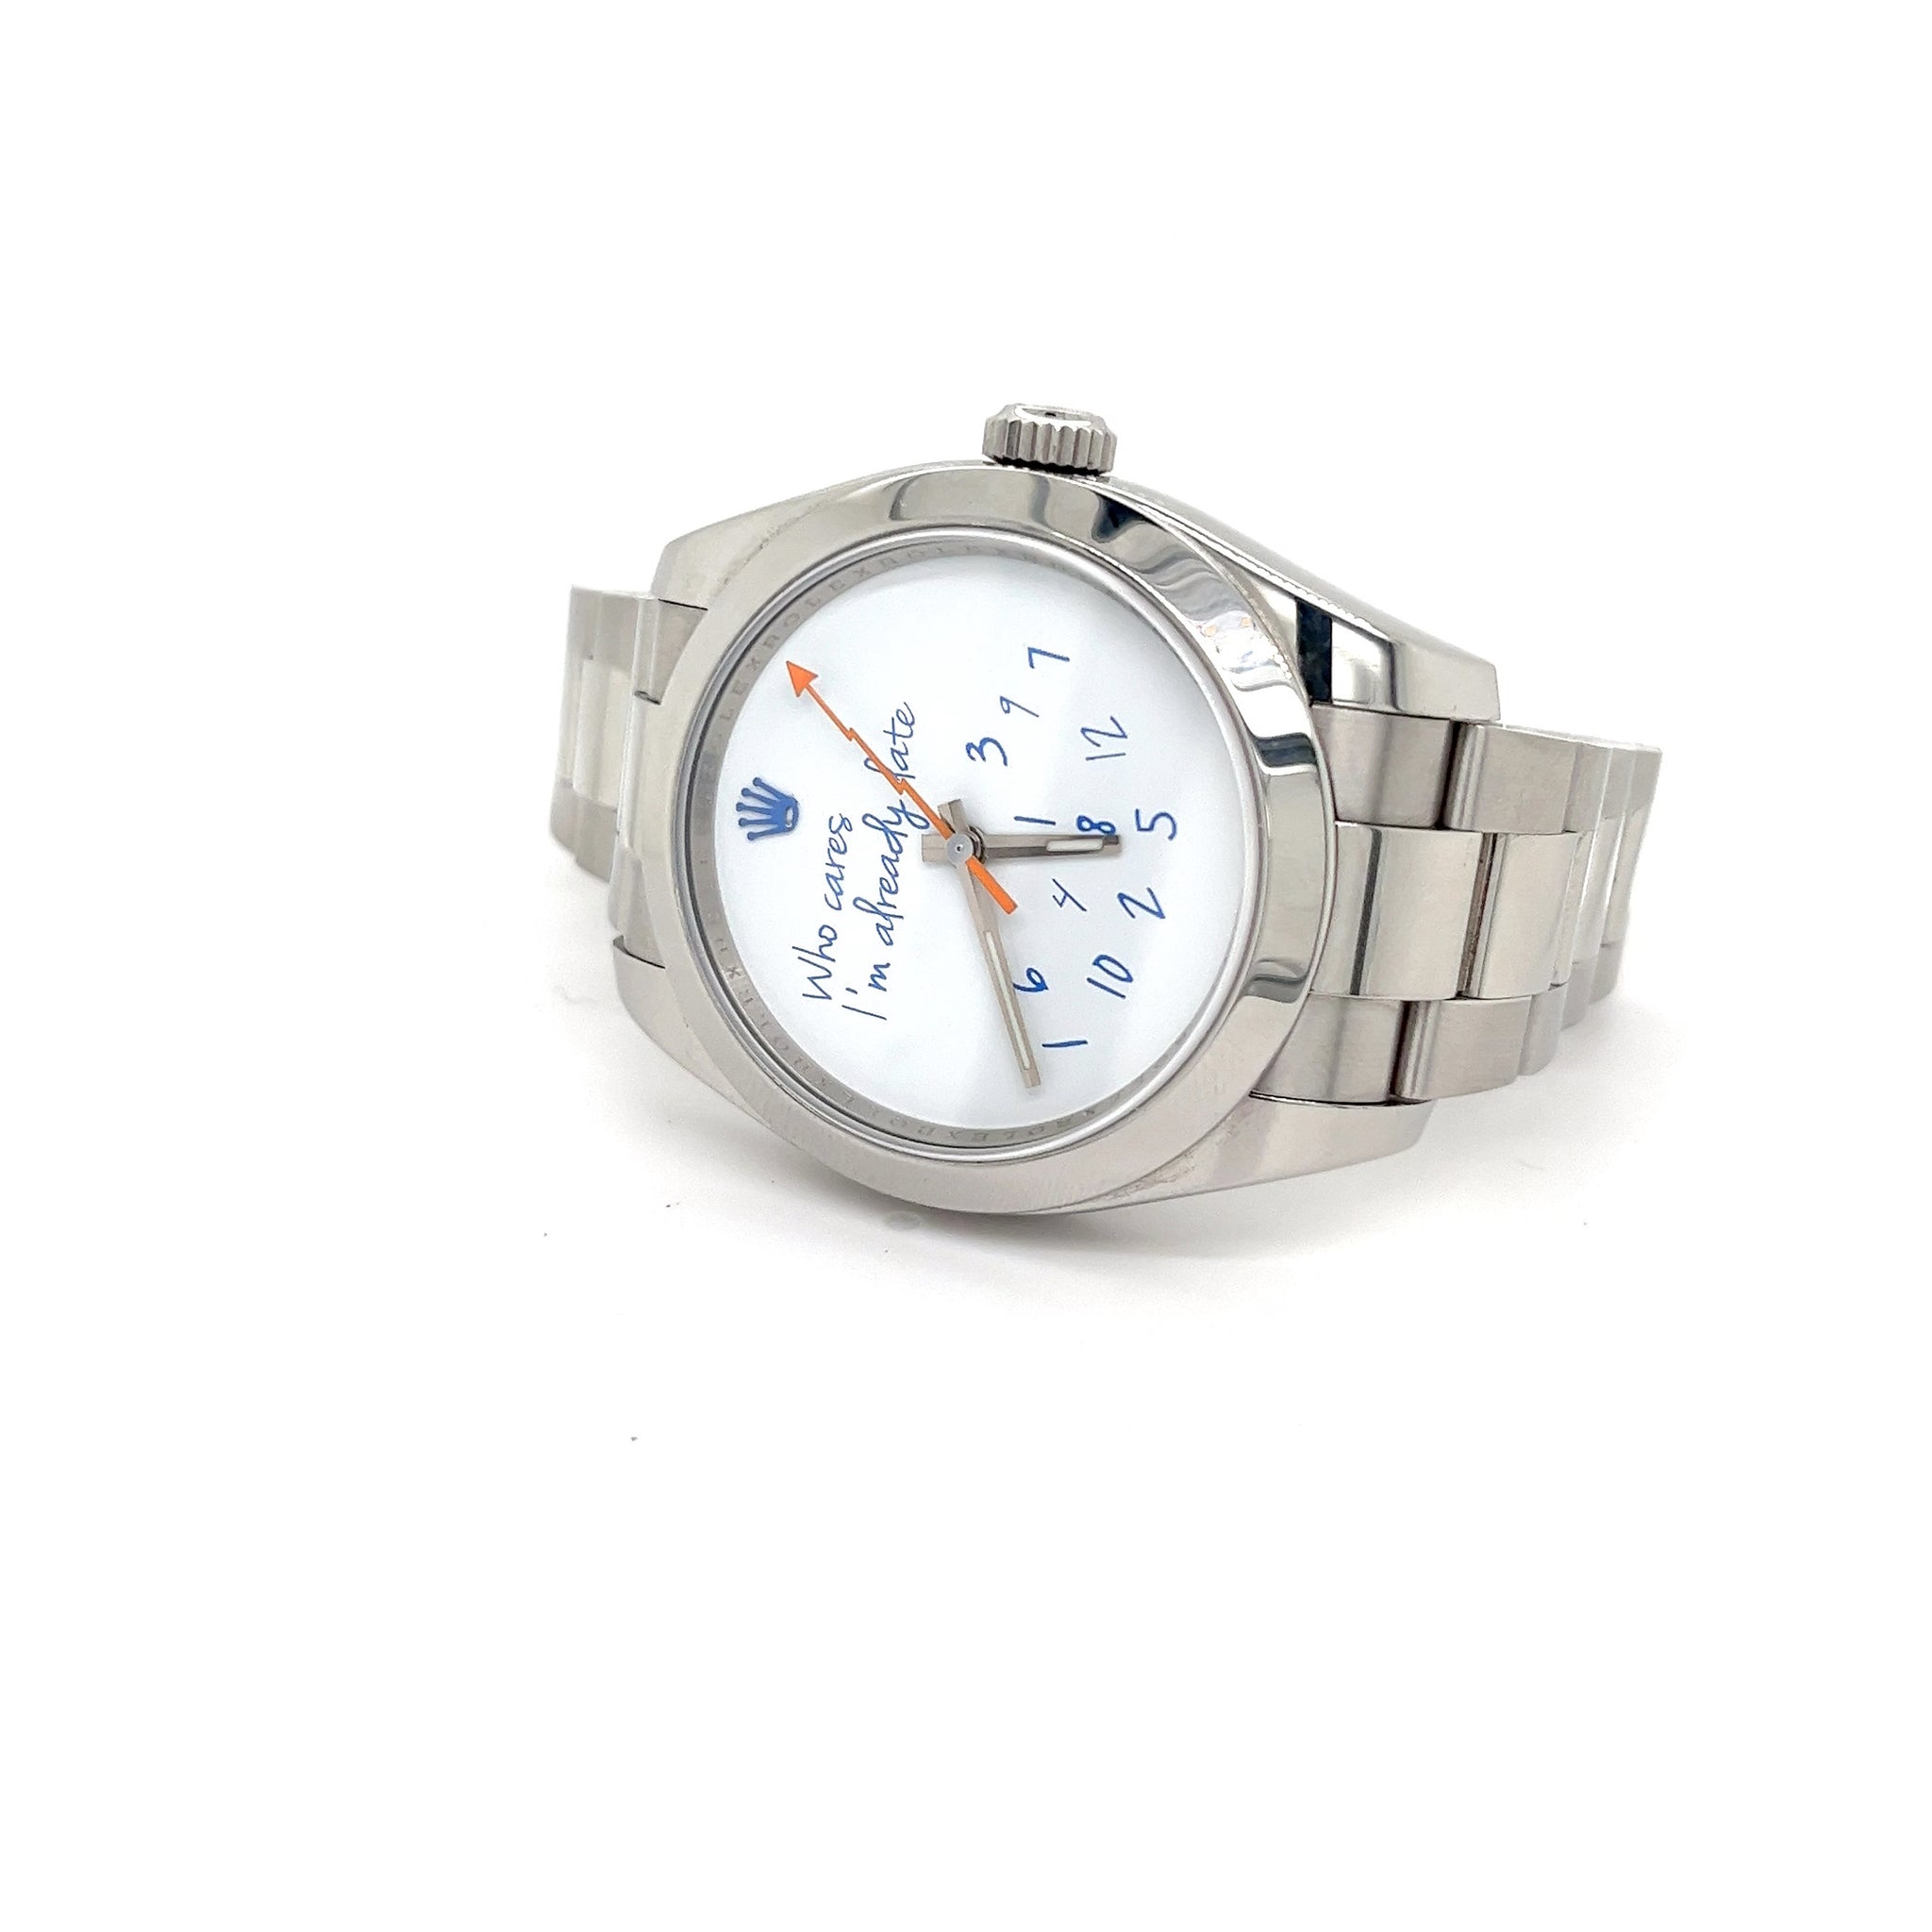 Exclusive 40mm Rolex Milgauss "Who cares I'm already late" custom dial blue font